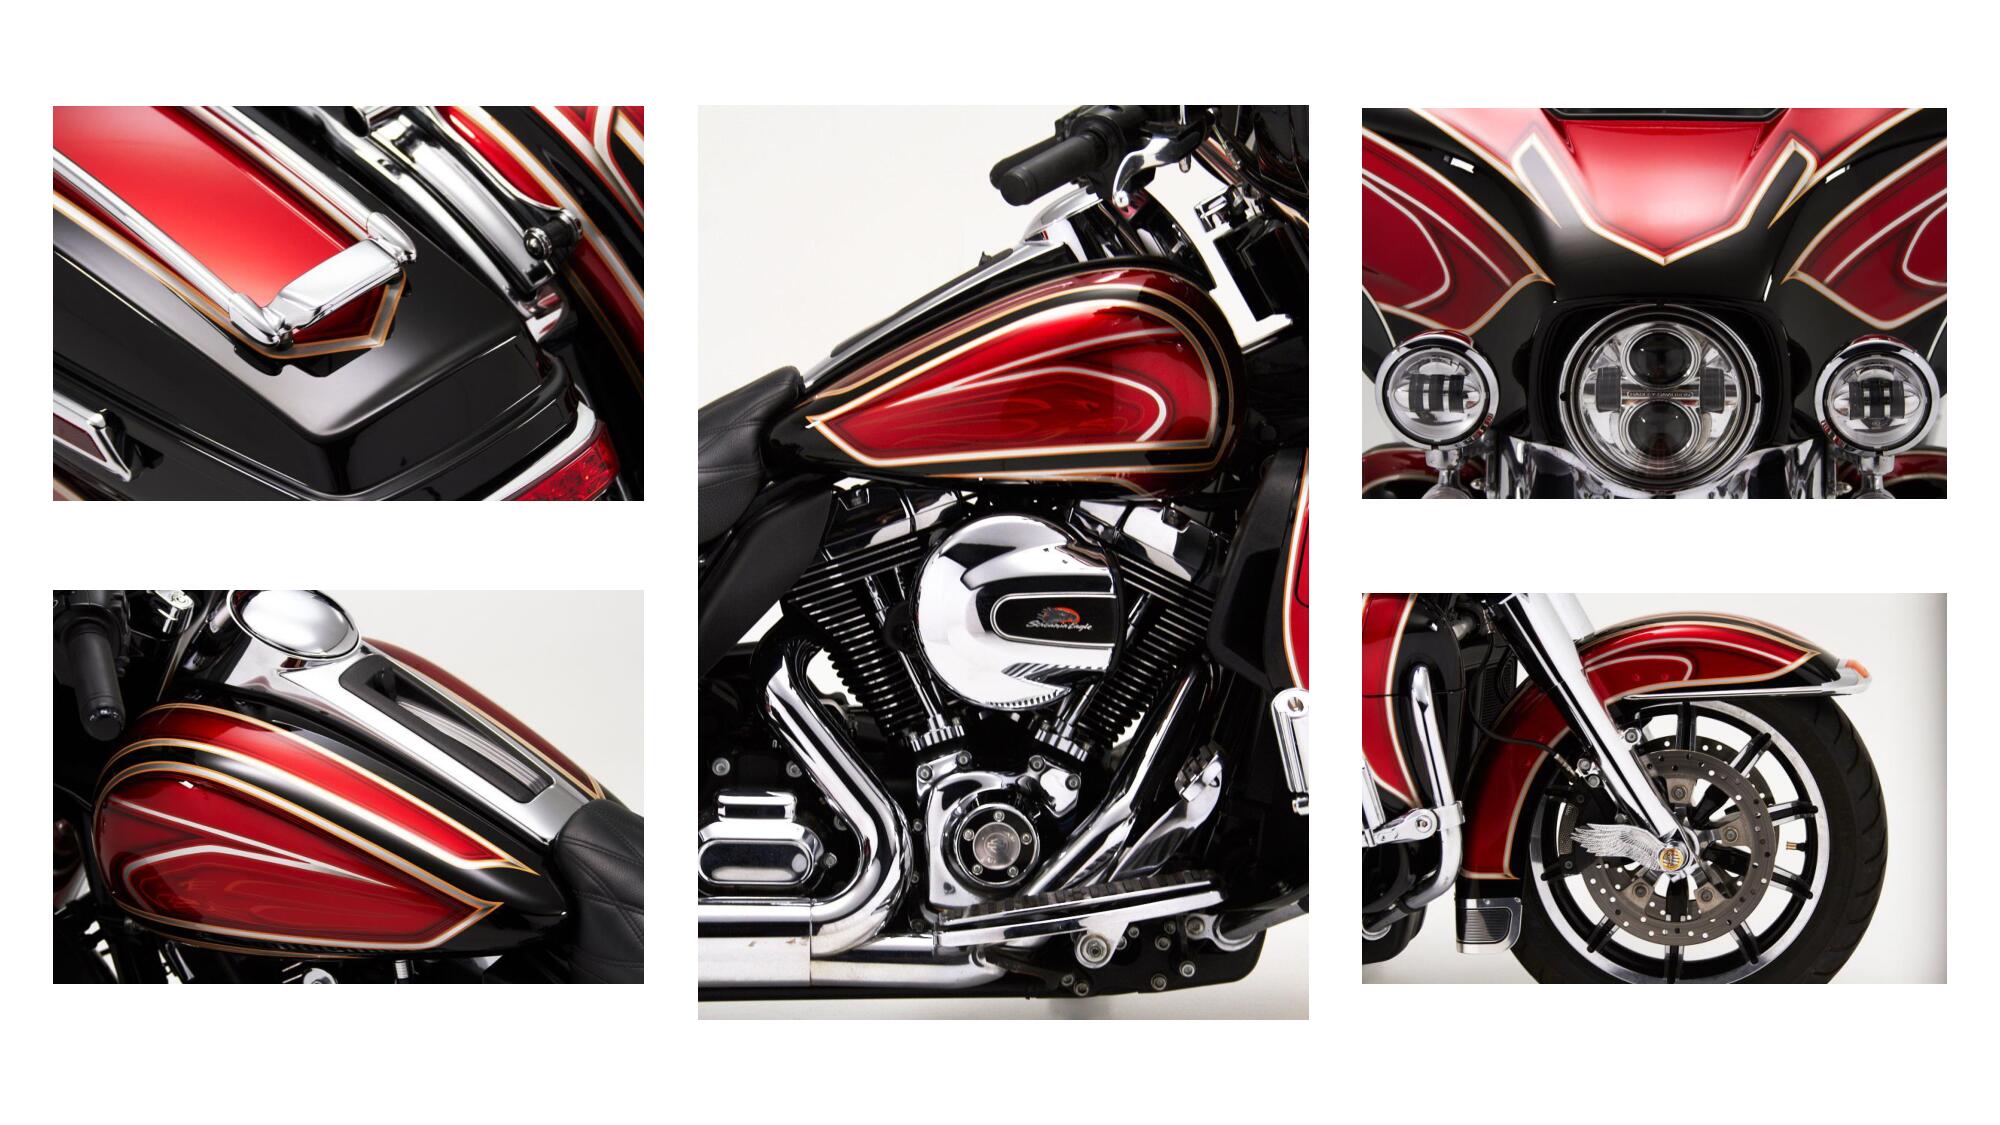 Red/Black with Gold and white pinstipe Bike 